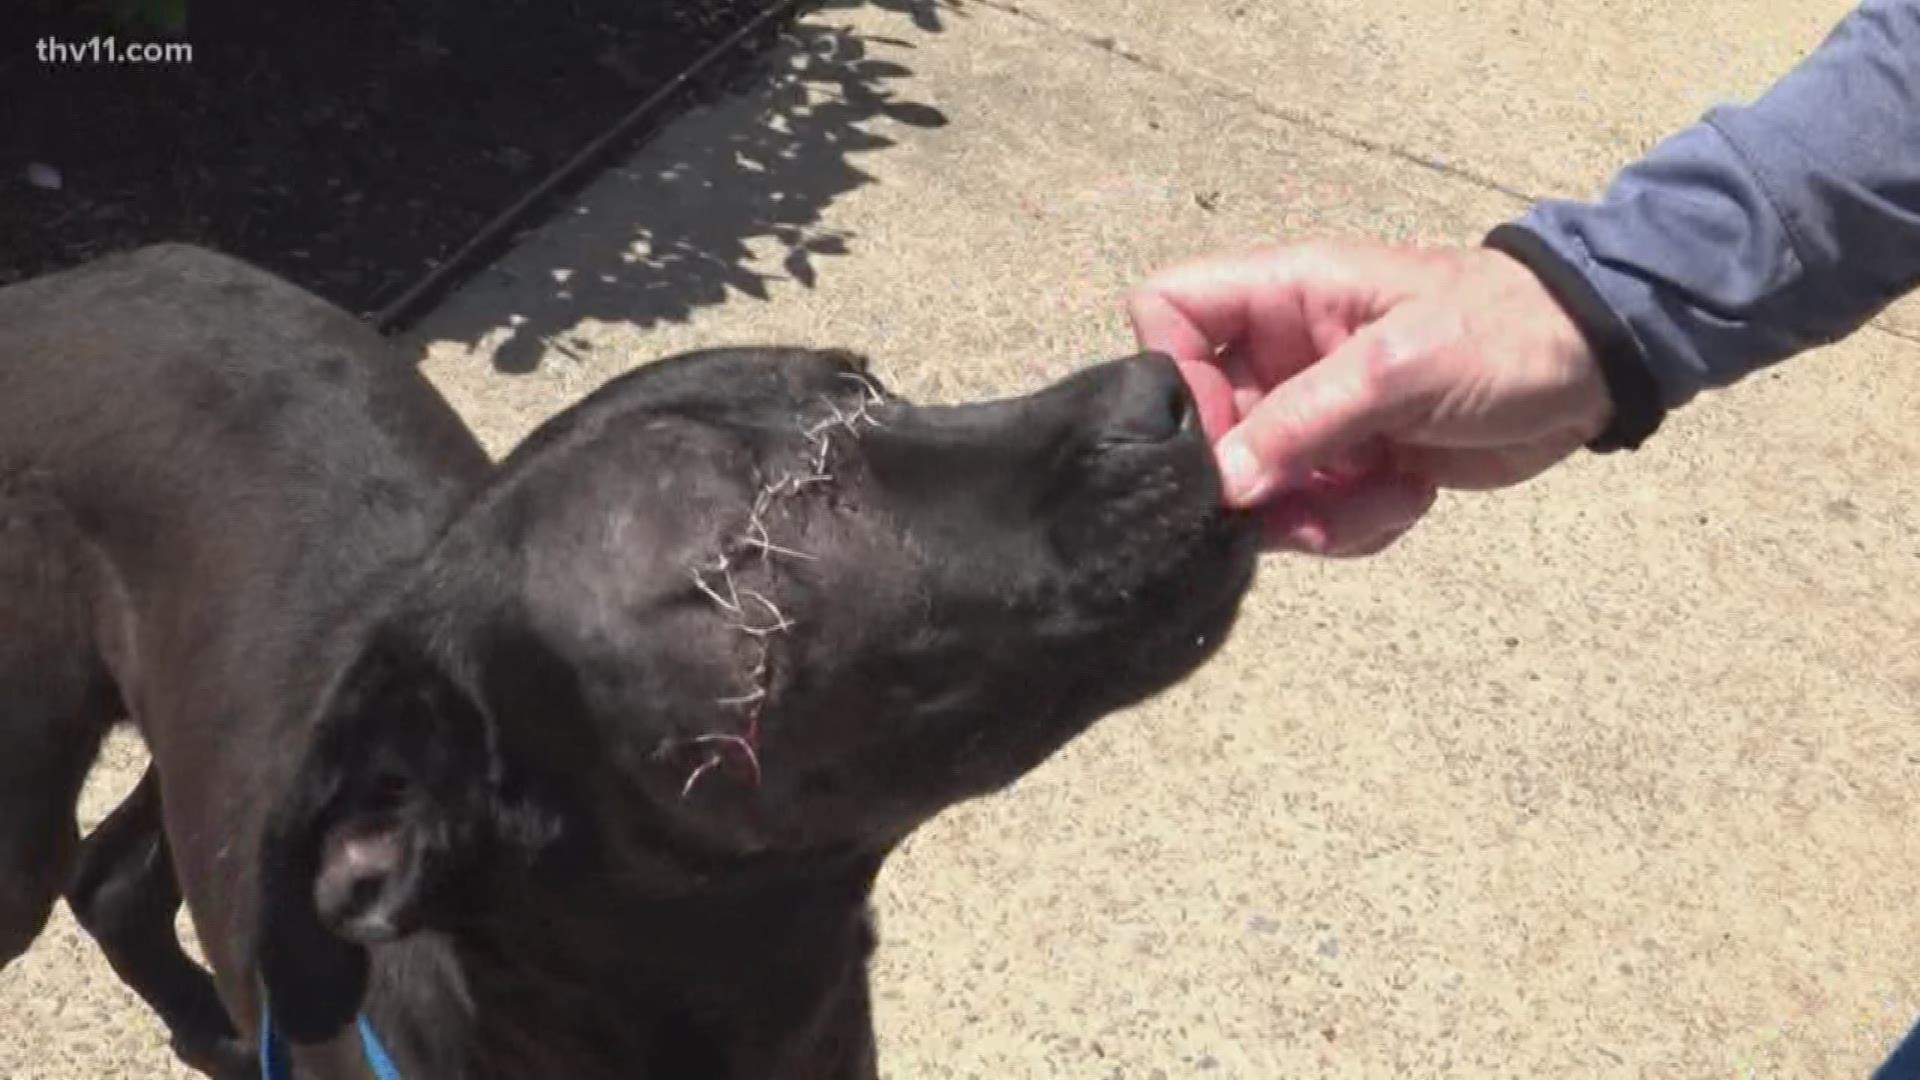 Miracle dog survives being shot in the face